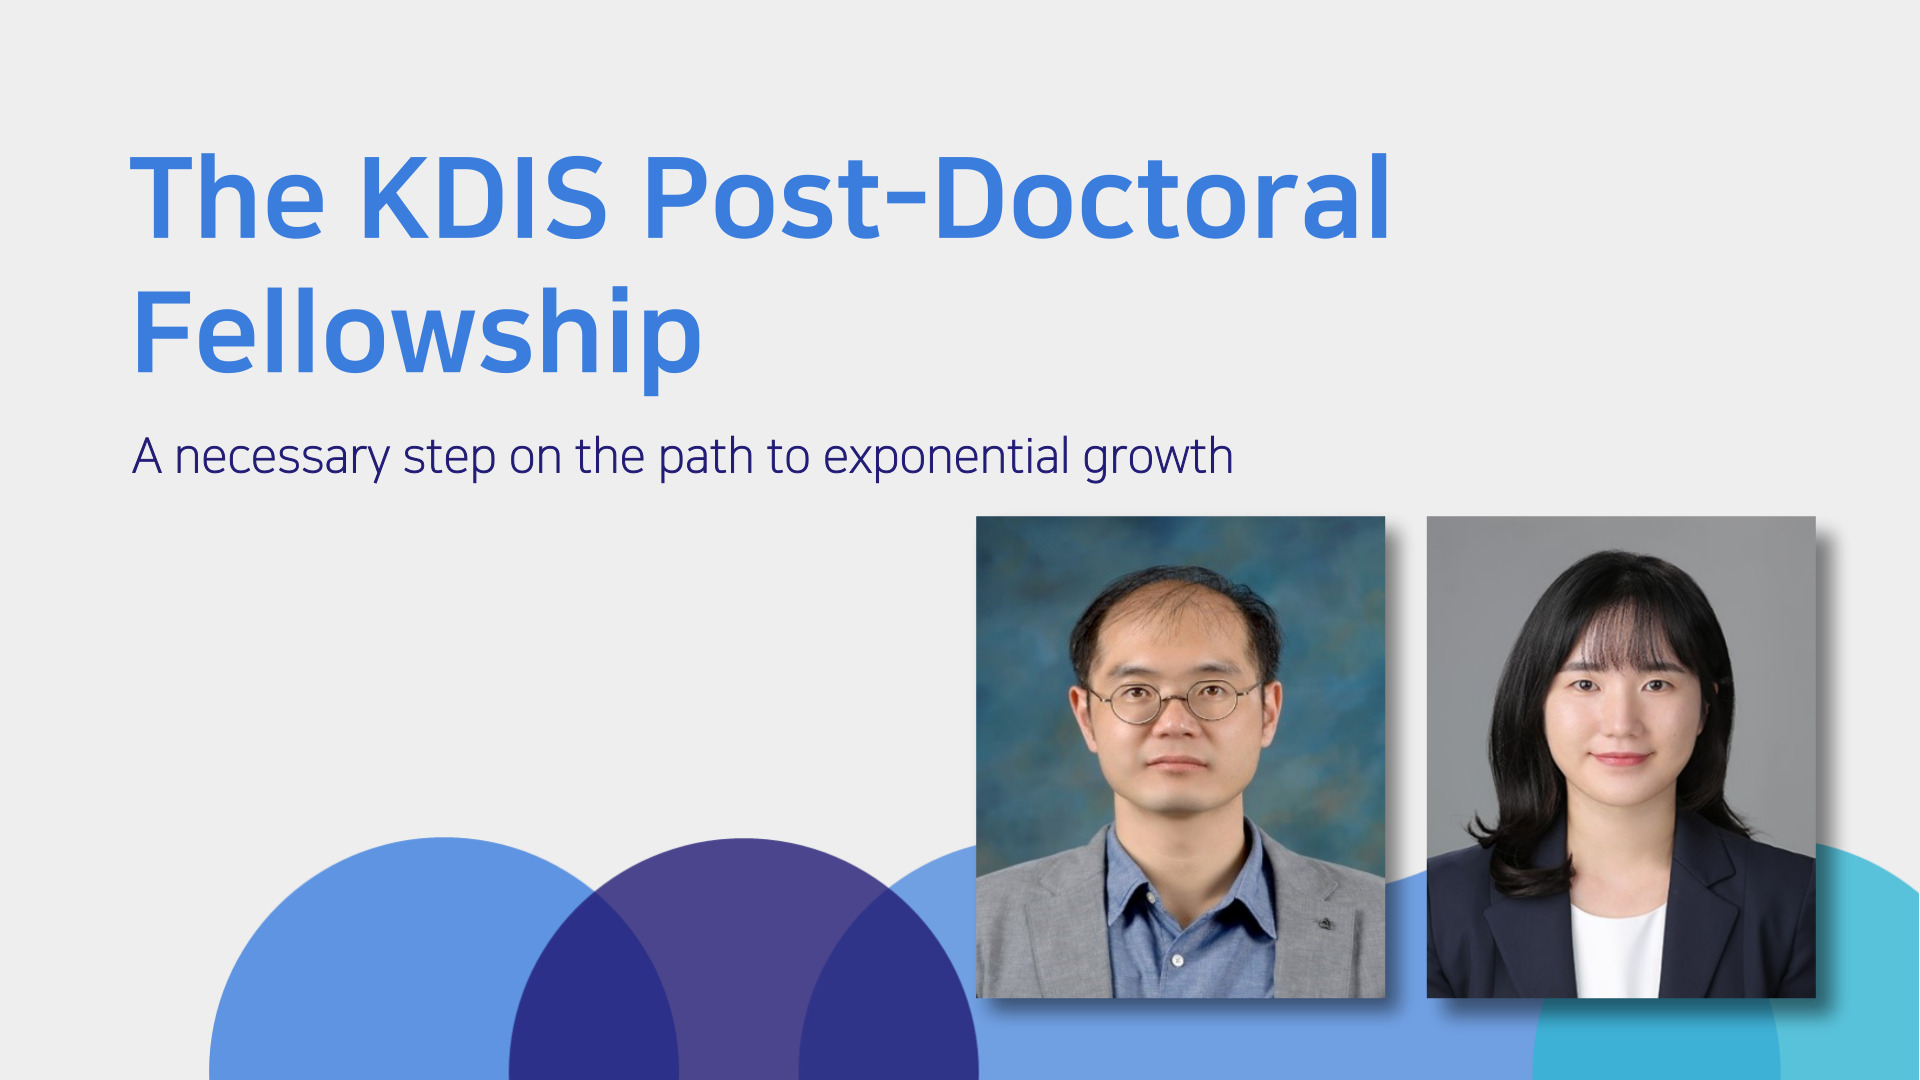 The KDIS Post-Doctoral Fellowship: A necessary step on the path to exponential growth